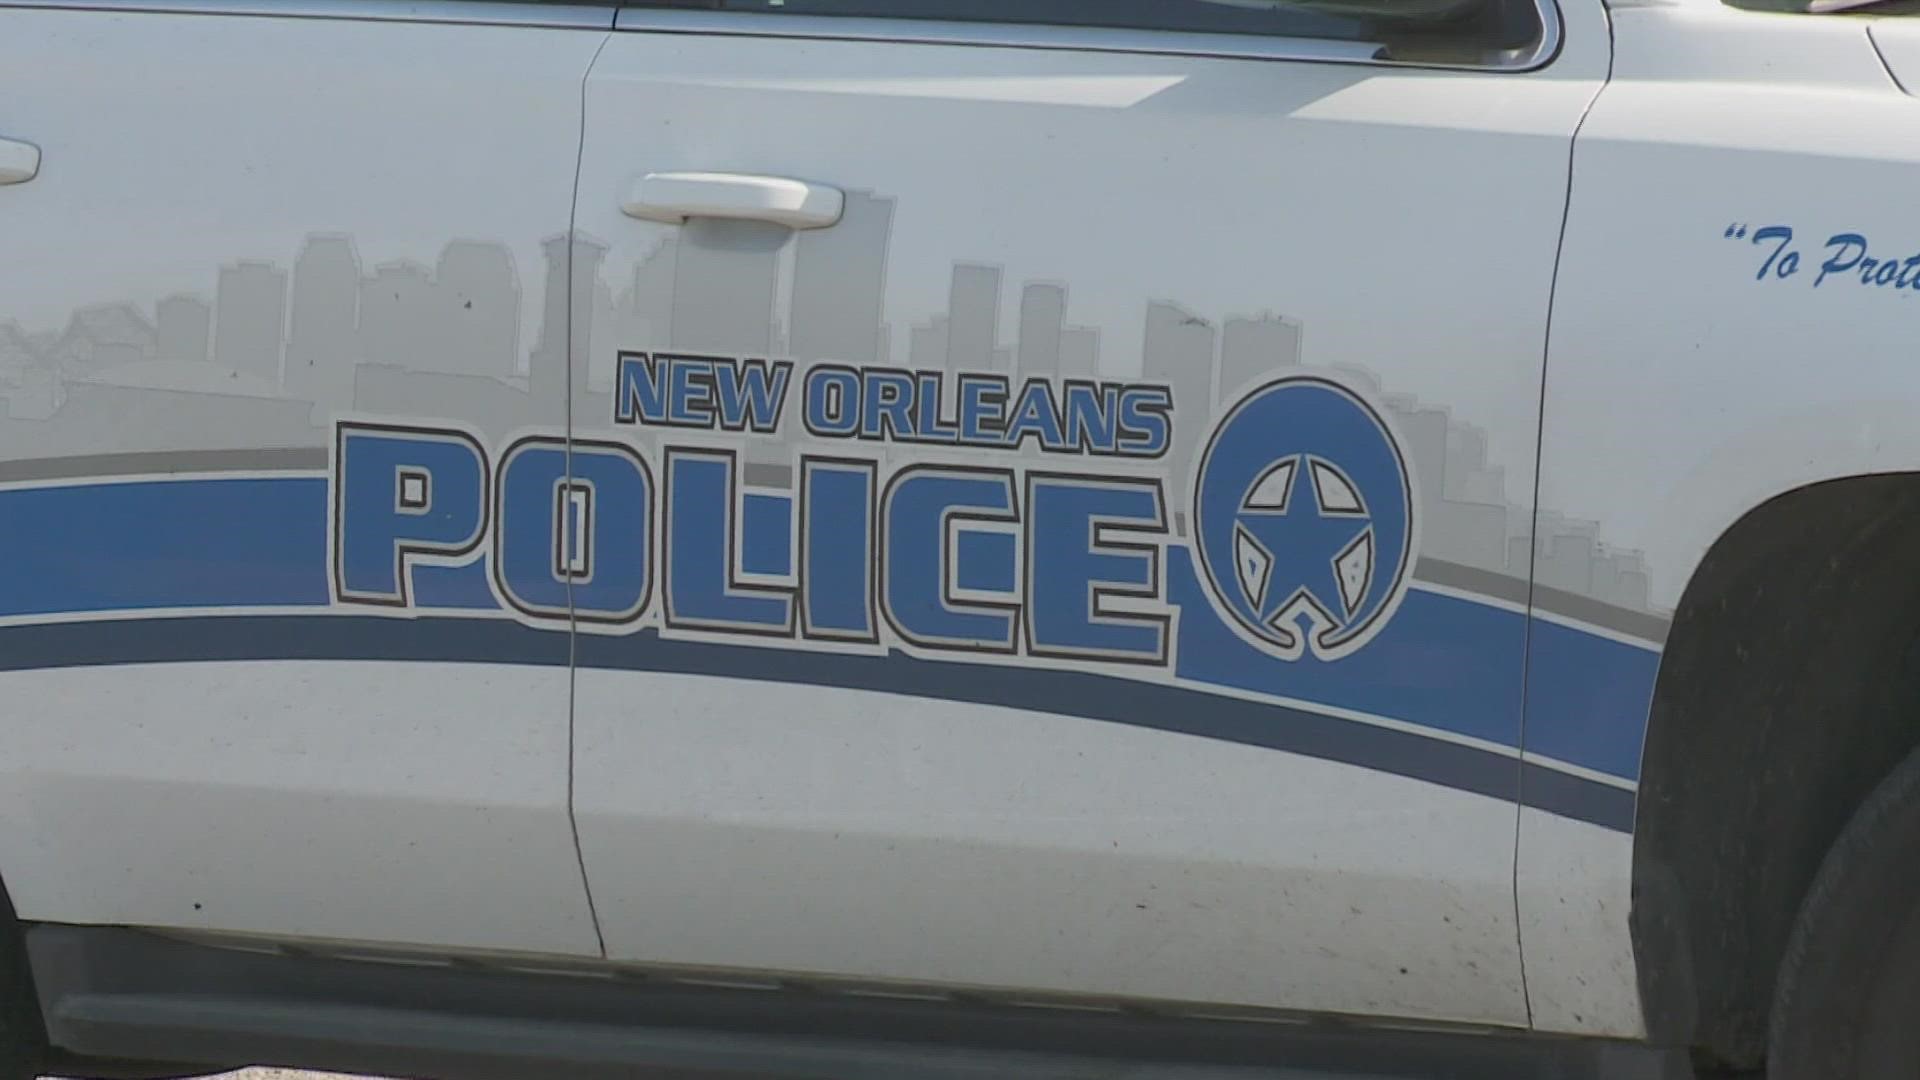 That accountability comes as the NOPD operates under a federal consent decree. The agreement between the Department of Justice and the city started back in 2012.